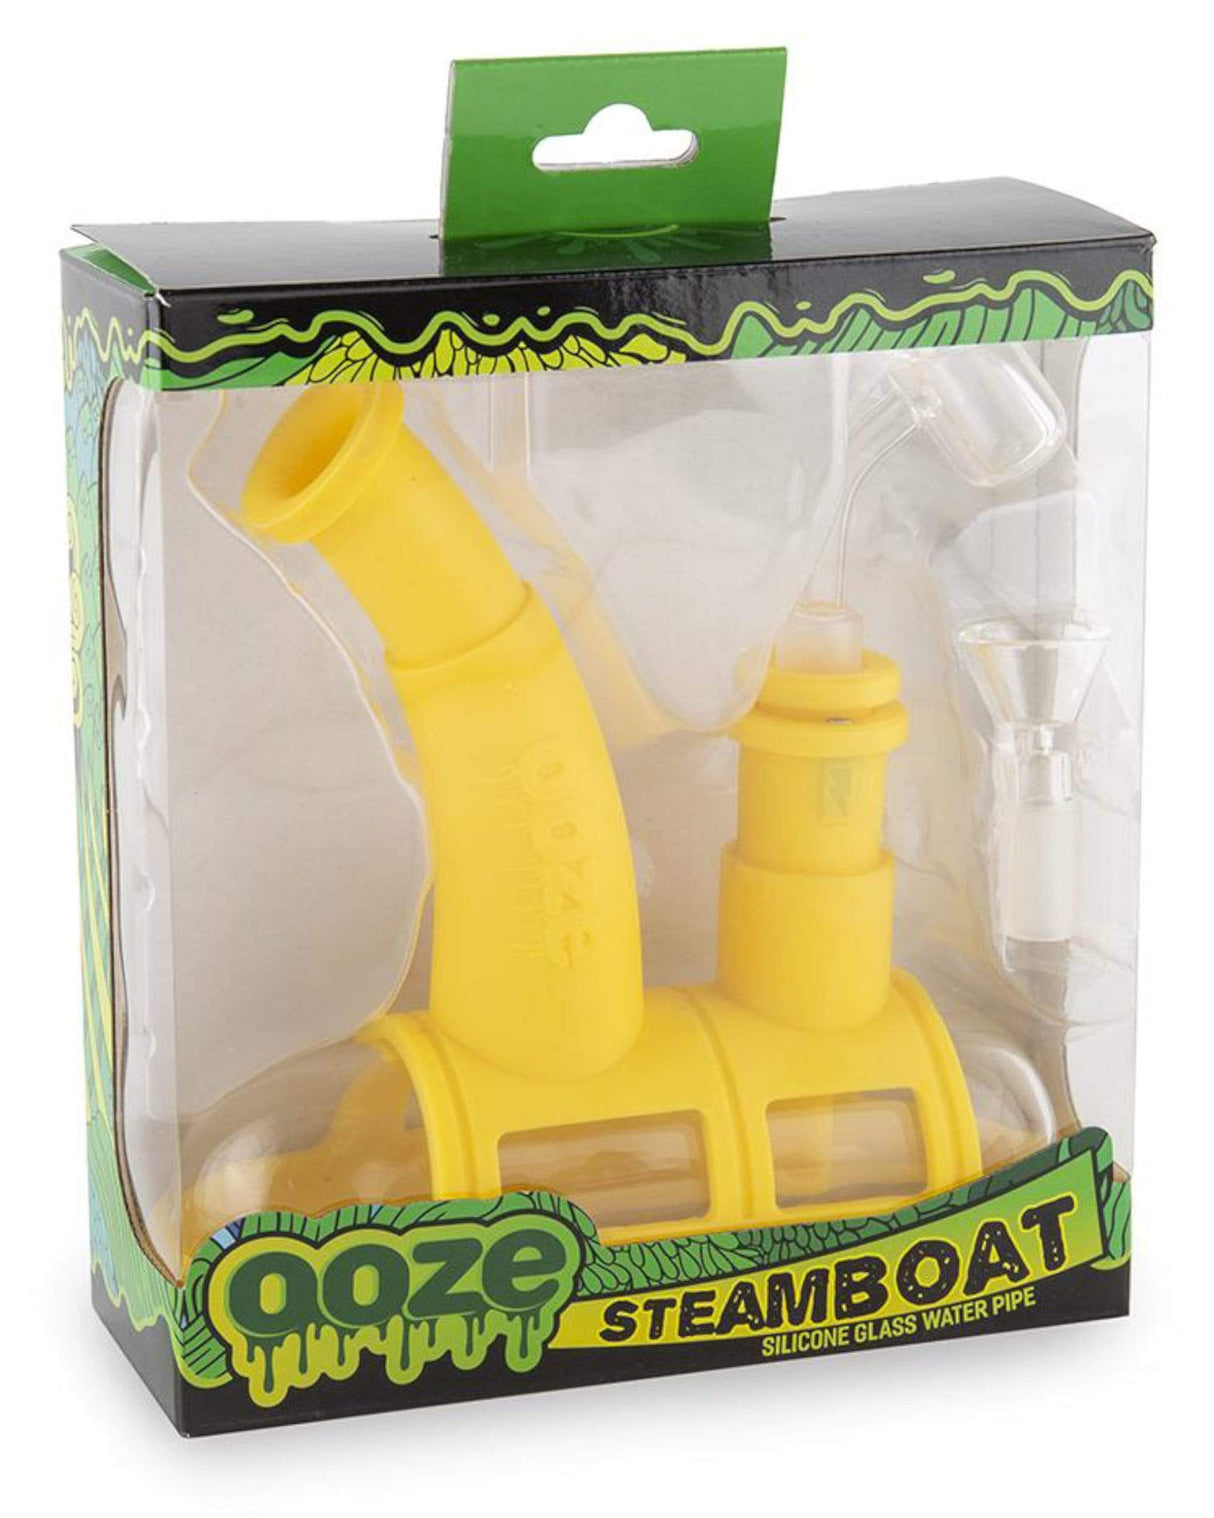 Ooze Steamboat Silicone Bubbler in Yellow, Front View Packaged for Durability and Portability